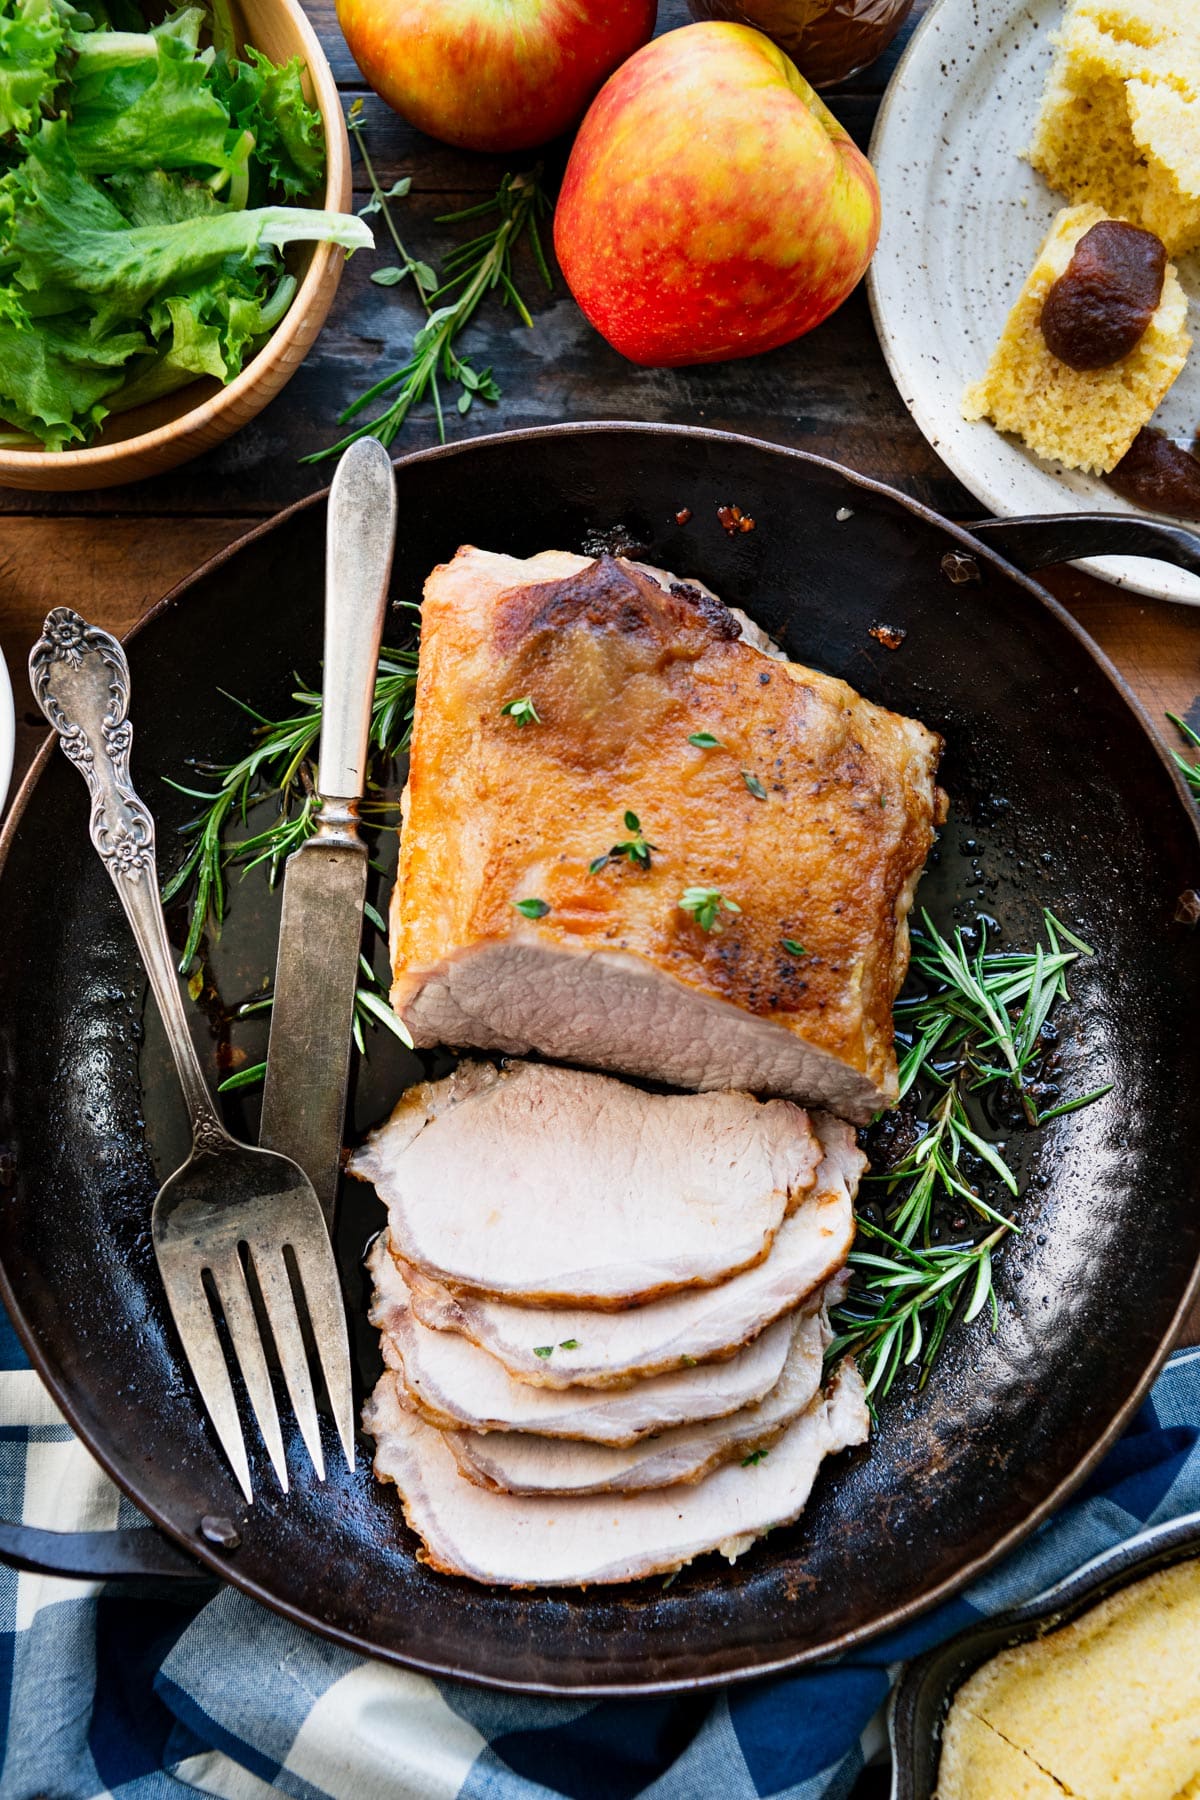 Overhead shot of a sliced pork loin on a wooden table with salad and cornbread.